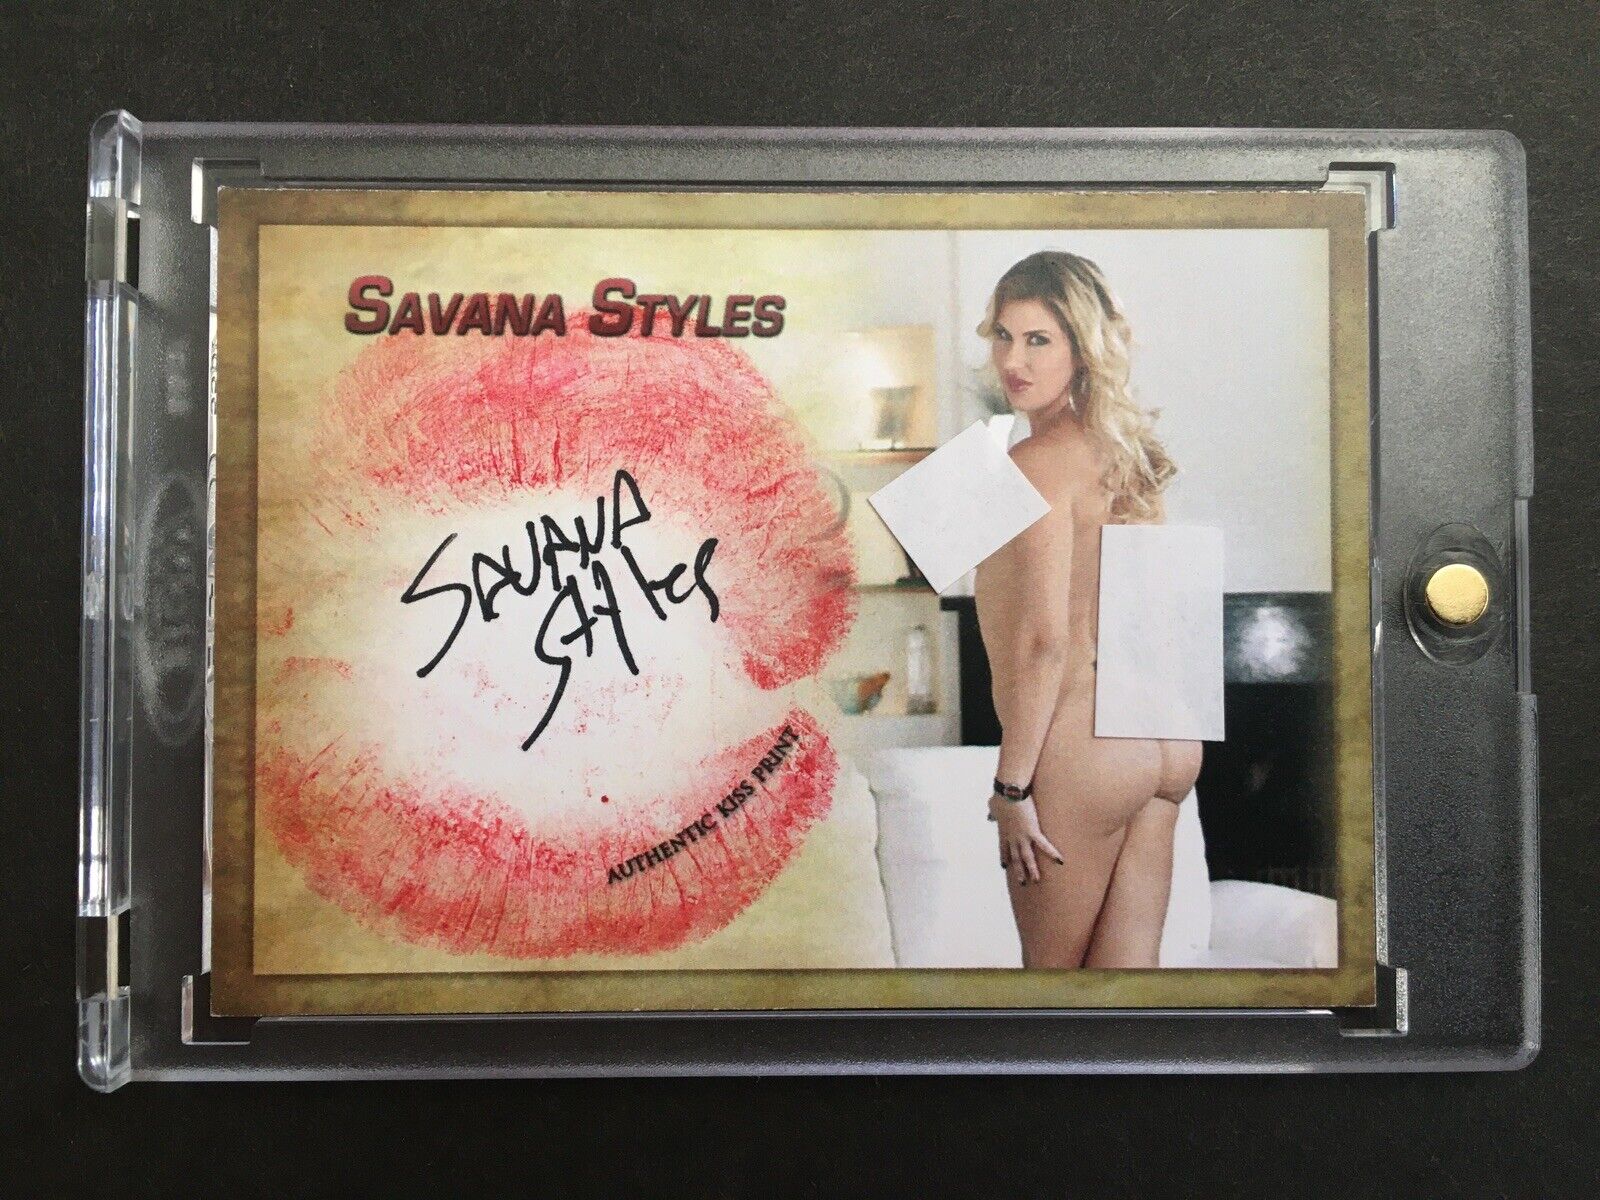 2017 Collectors Expo Model Savana Styles Autographed Kiss Card